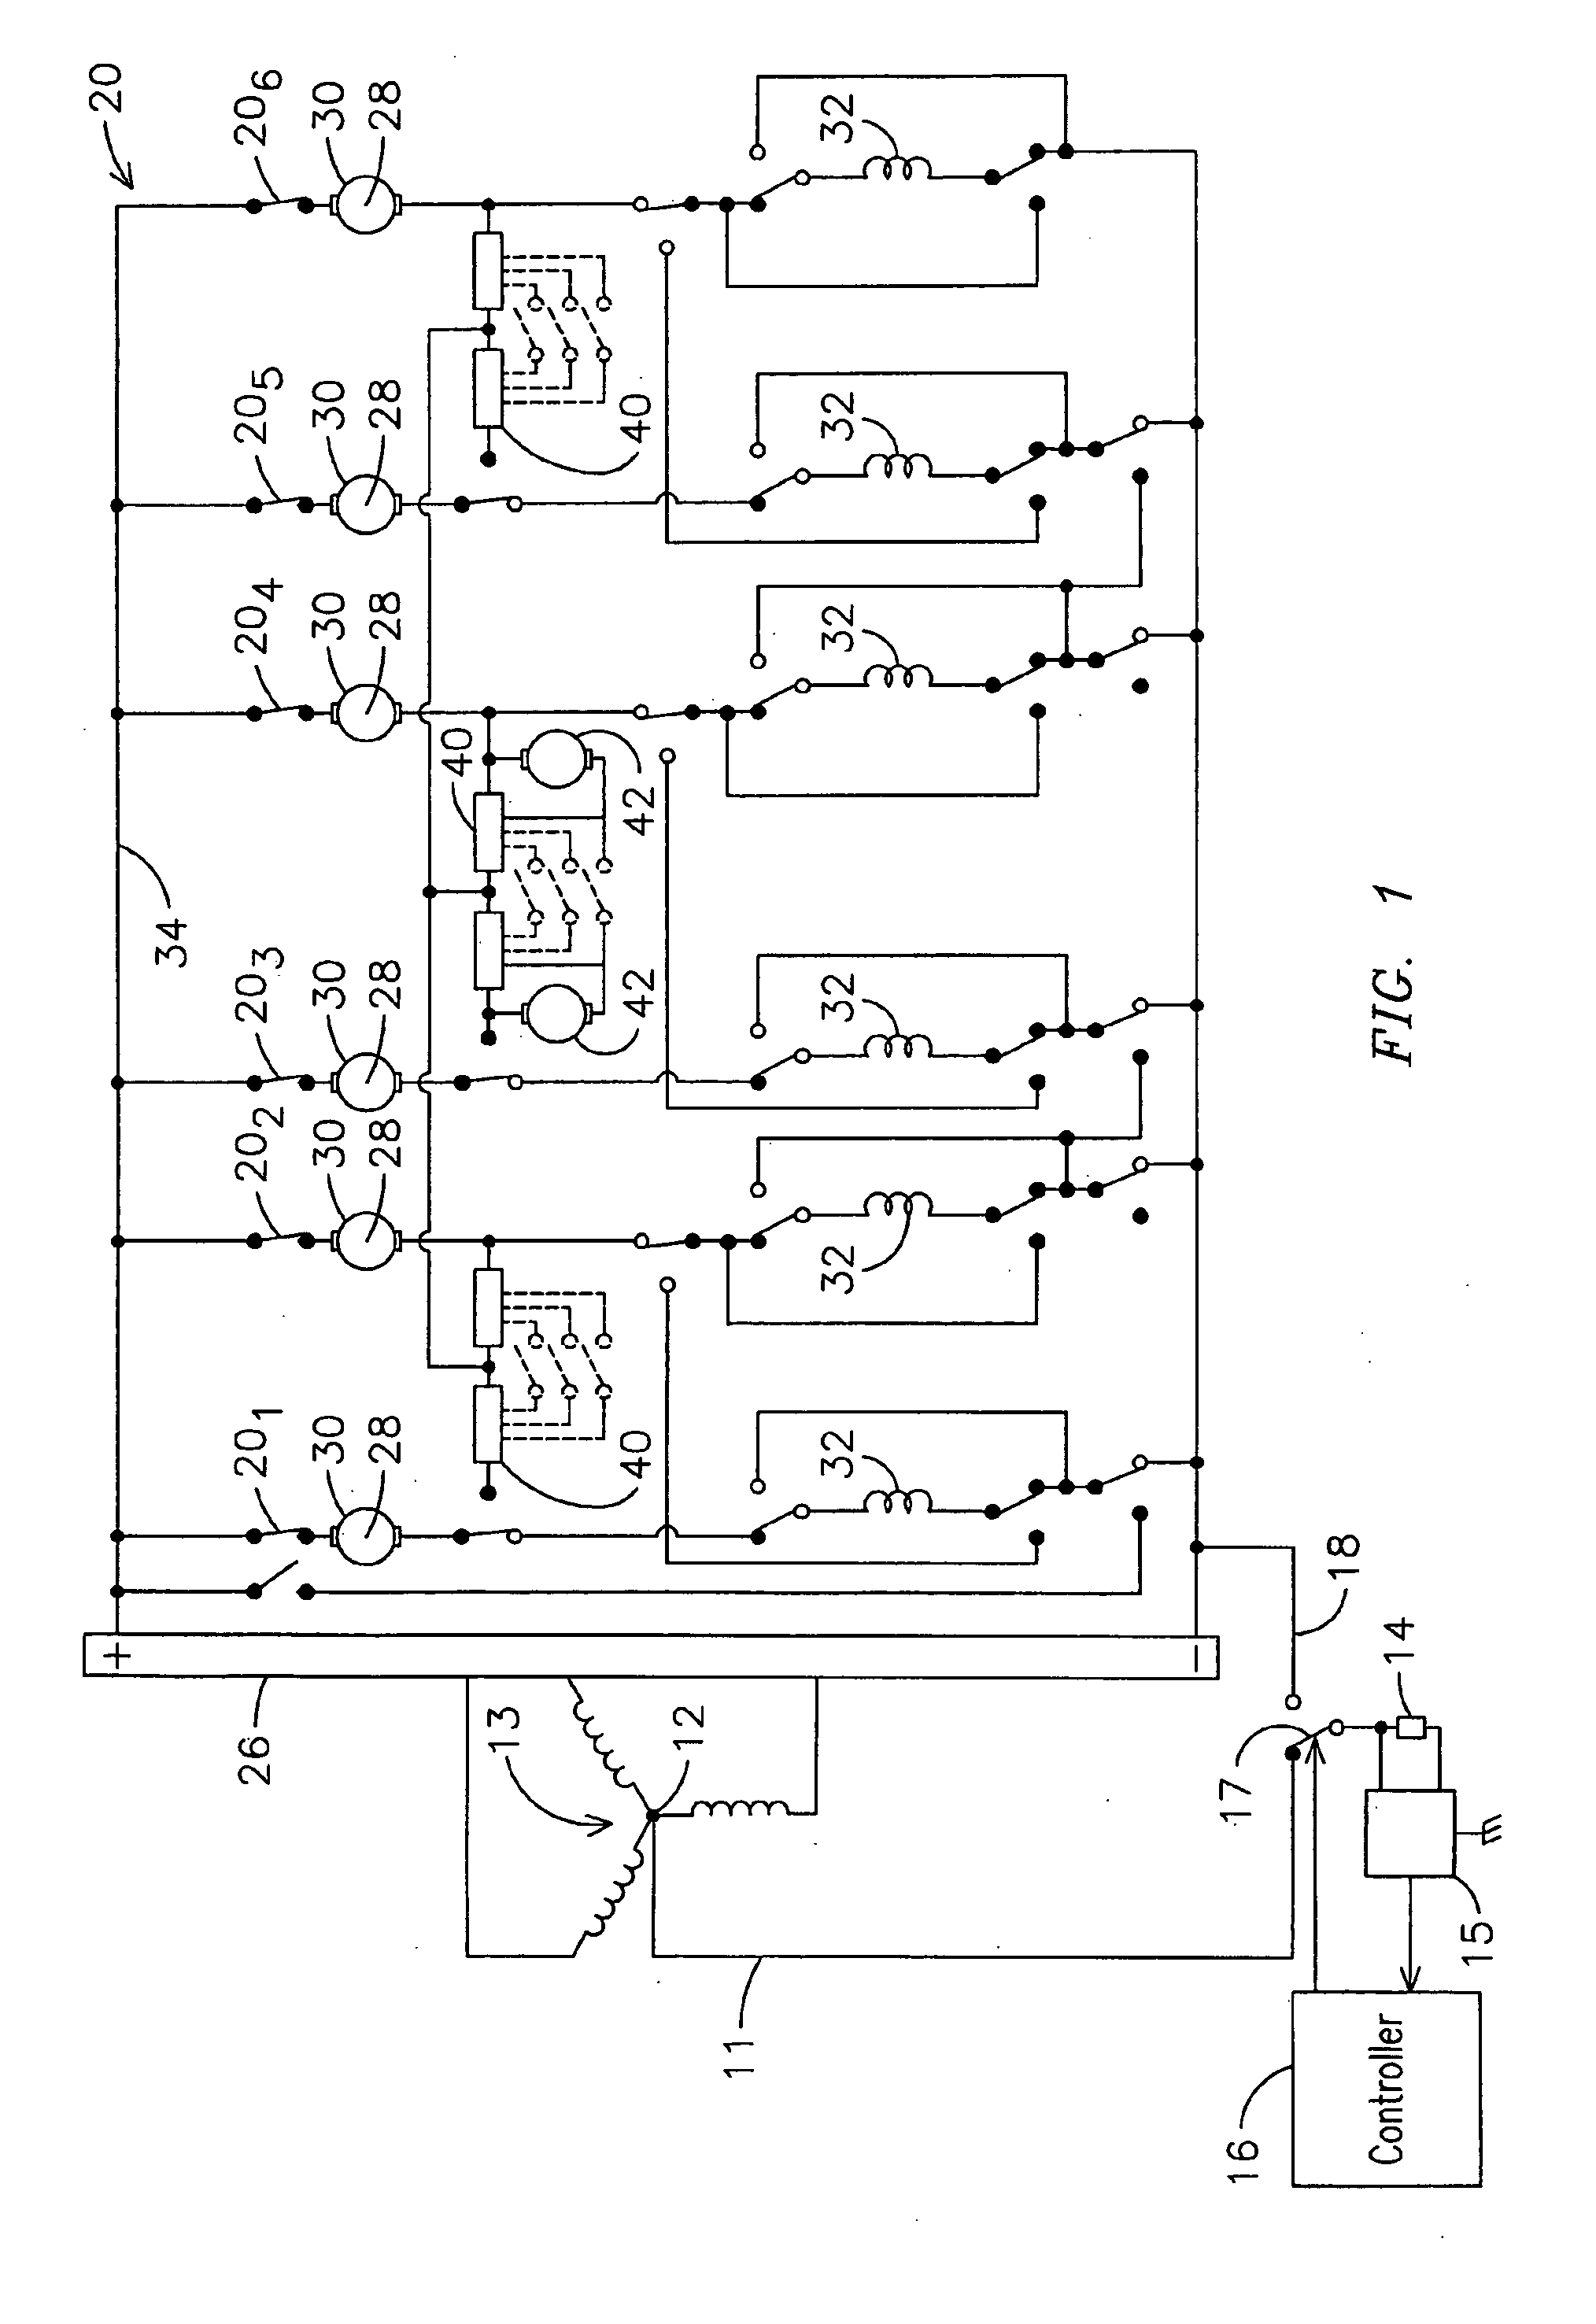 System and method for dealing with ground fault conditions that can arise in an electrical propulsion system